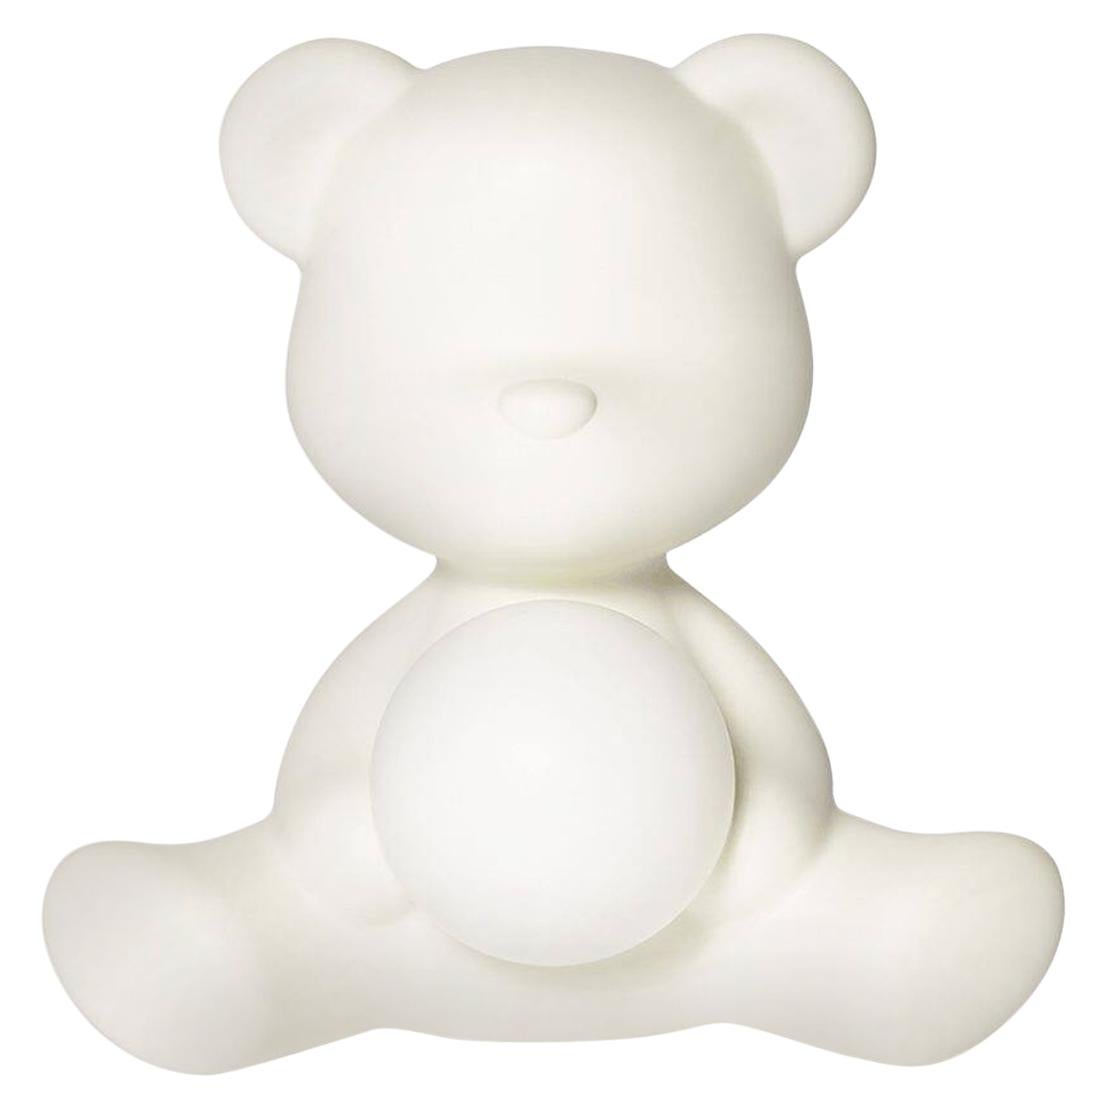 In Stock in Los Angeles, White Teddy Bear Lamp LED, Made in Italy